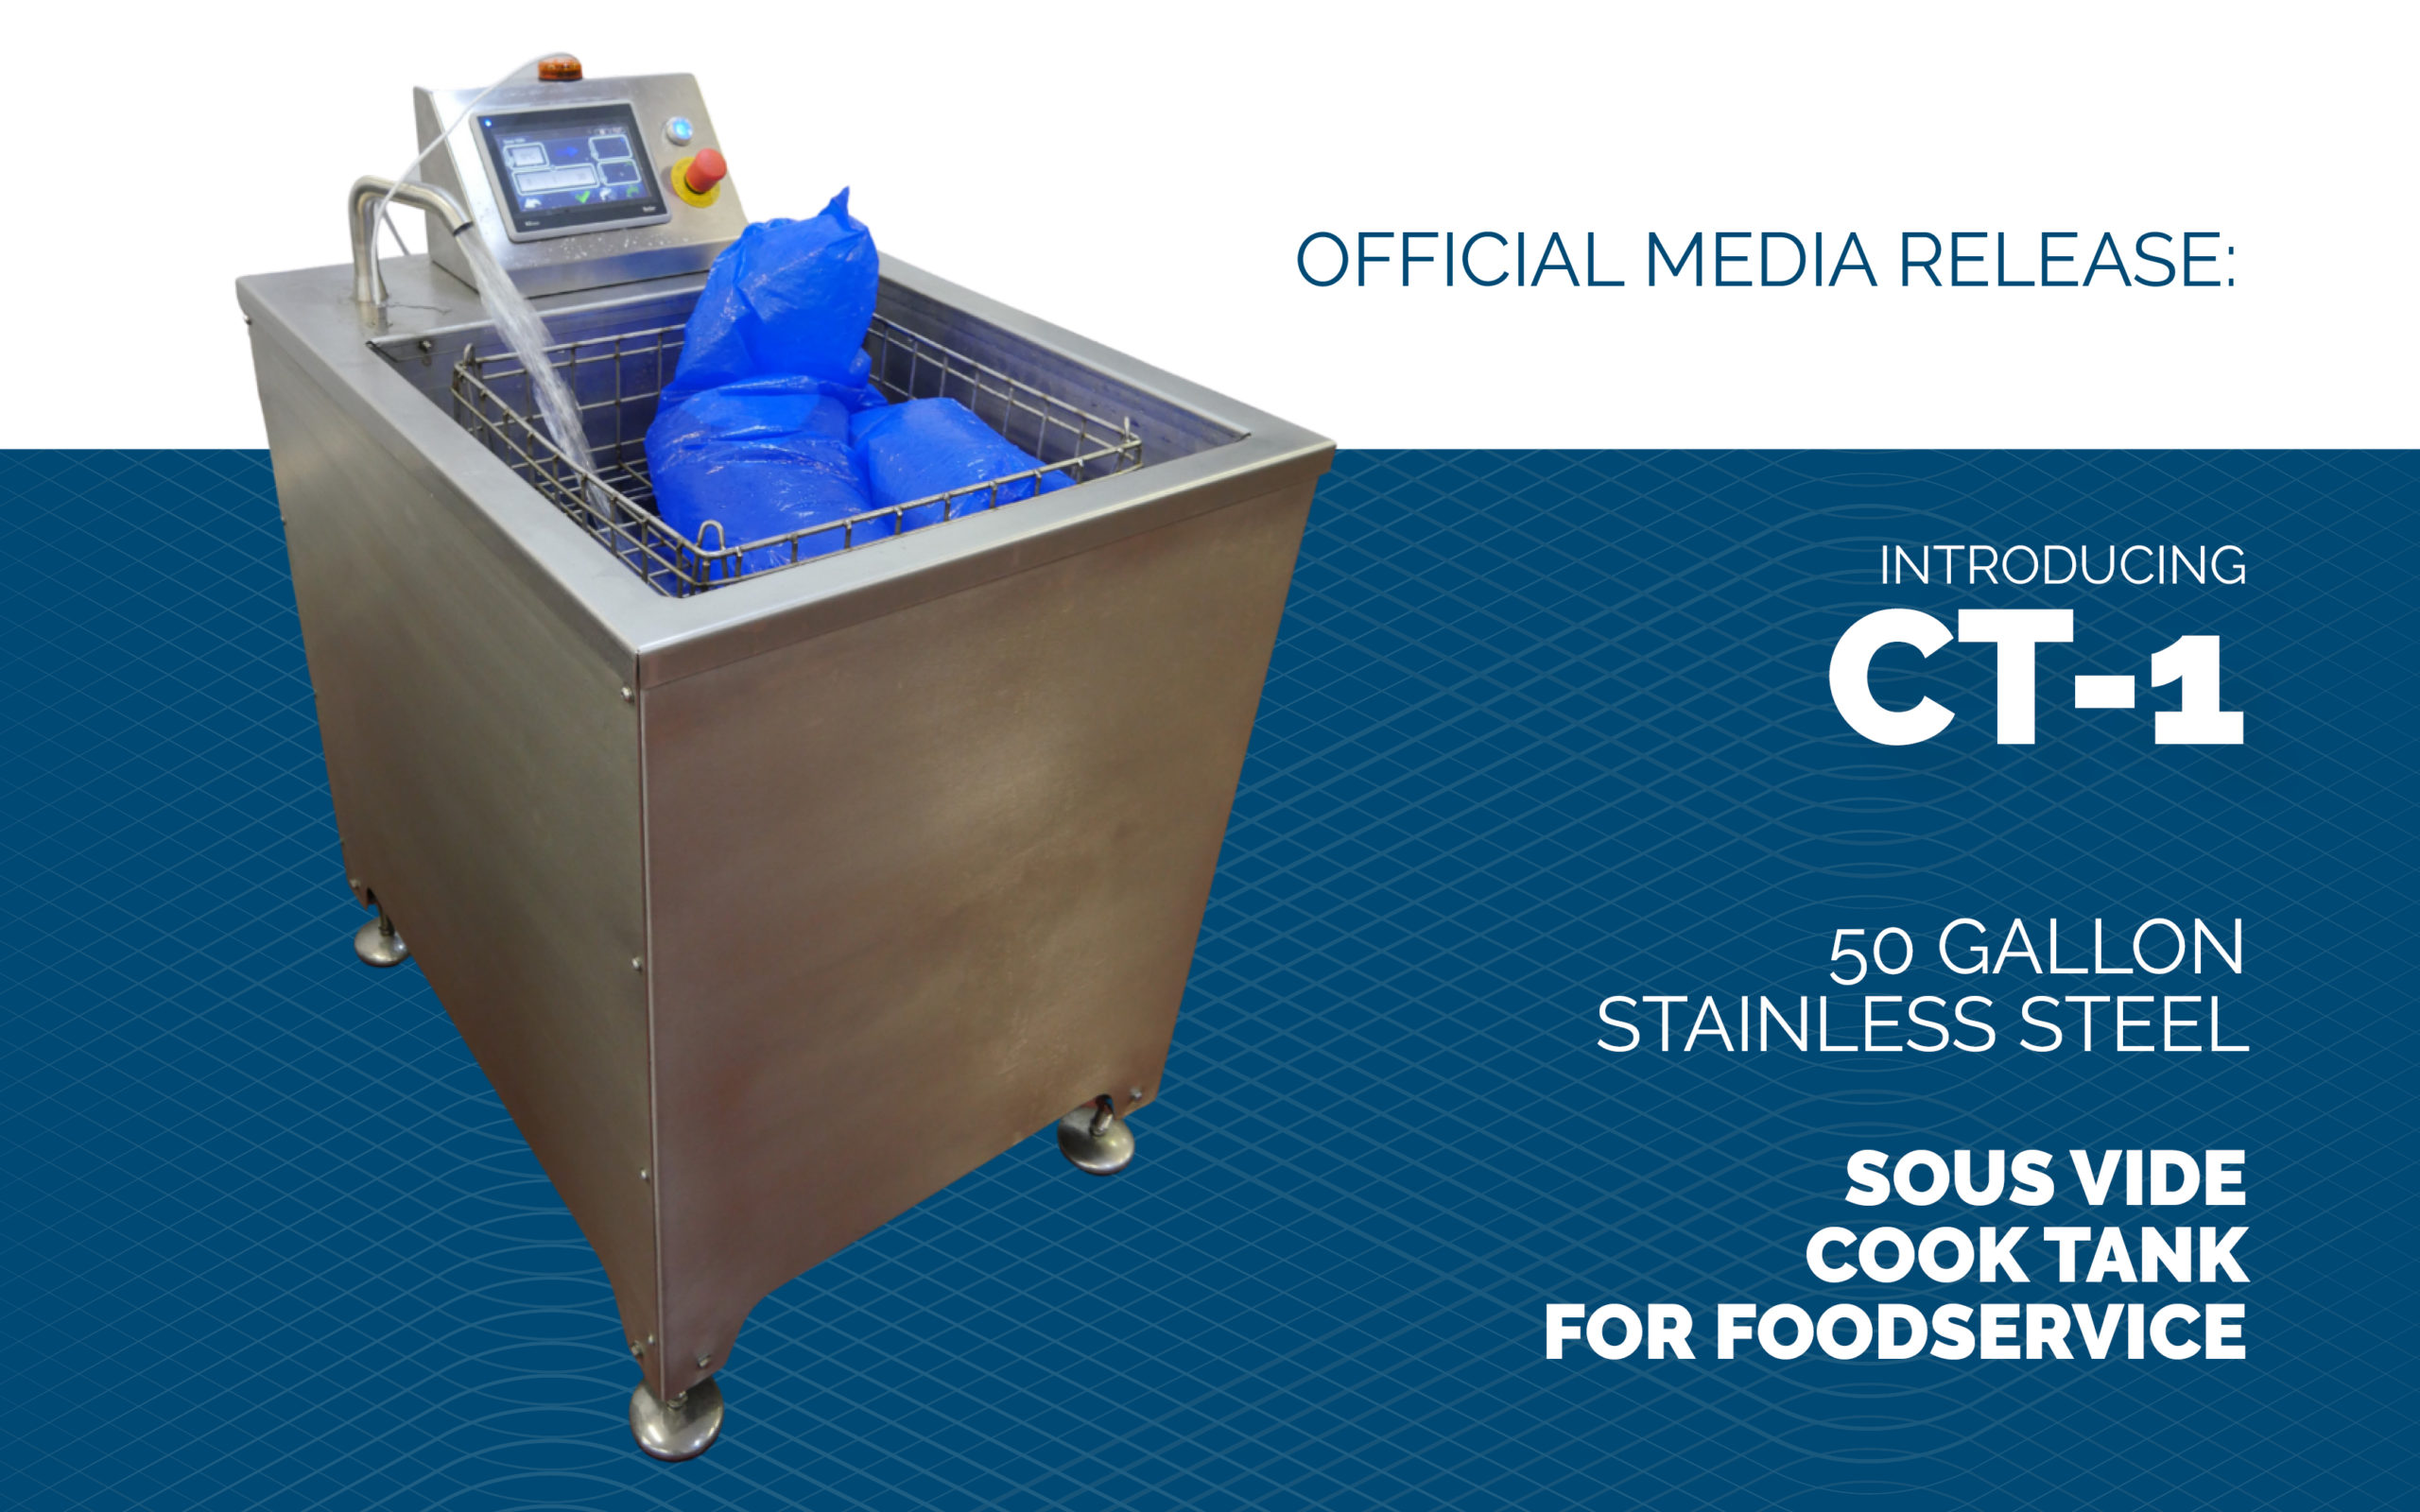 DC Norris North America launches a commercial sous vide cook tank, the CT-1